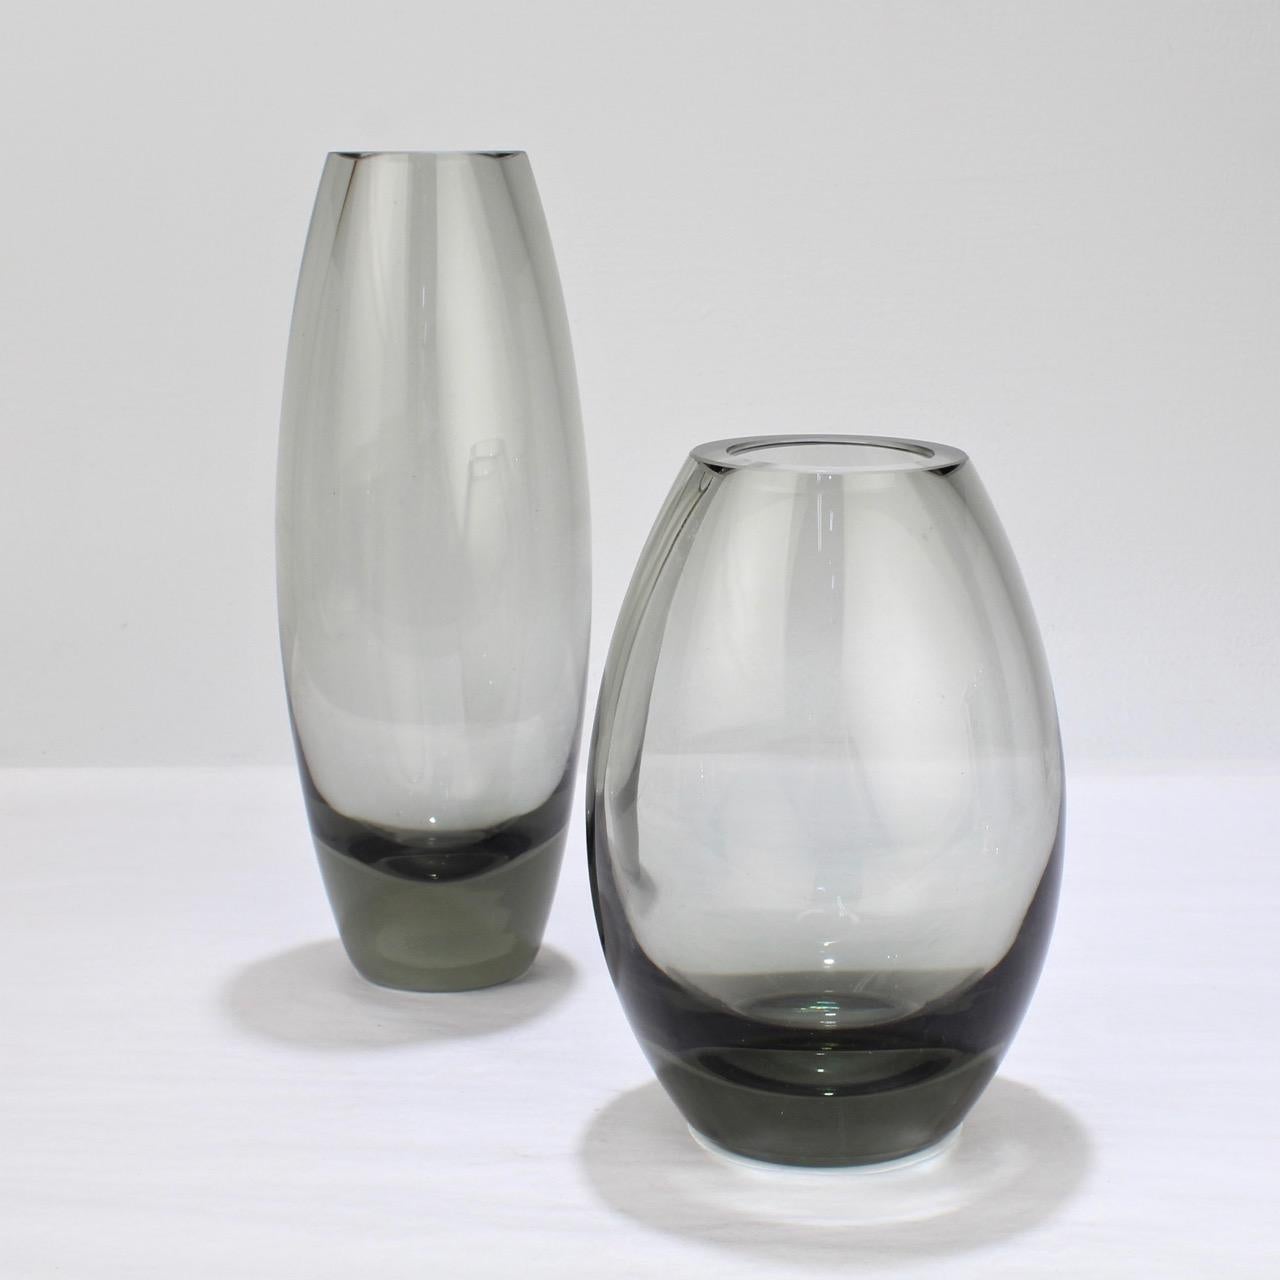 A terrific assembled pair of Hellas vases in grey.

Designed by Per Lutken for Holmegaard Glass. 

Each bases bears an etched mark for Holmegaard, 1956 and Per Lutken's monogram.

The crisp, clean lines of the vases speak directly to the